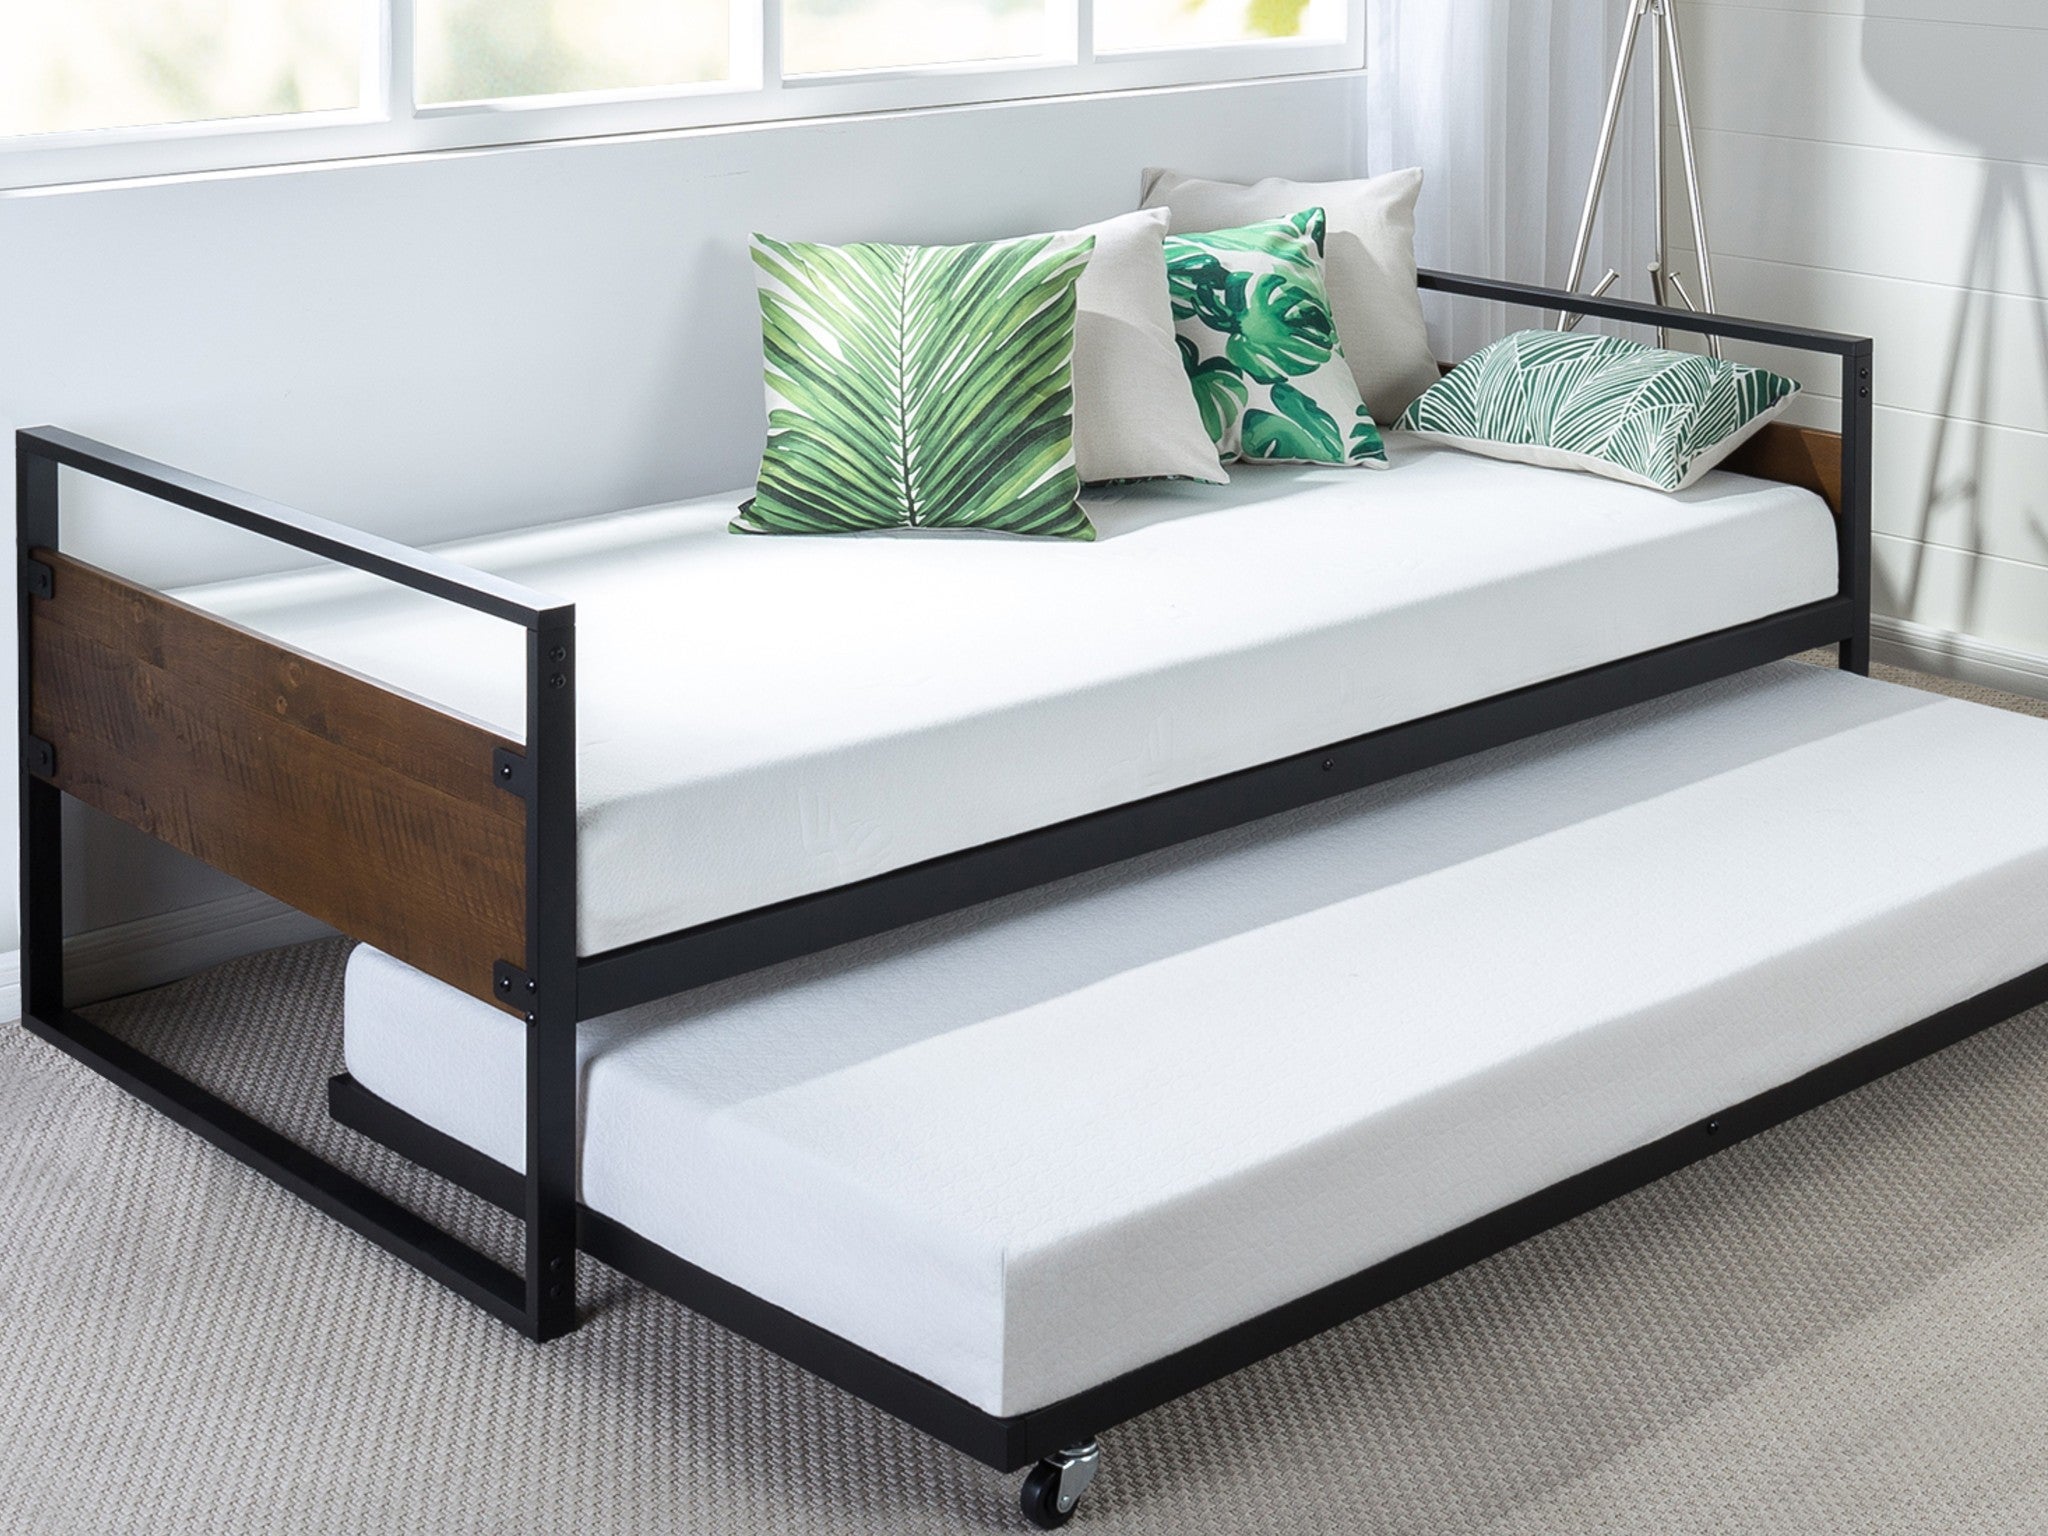 Symple Stuff barrett daybed with trundle indybest.jpg